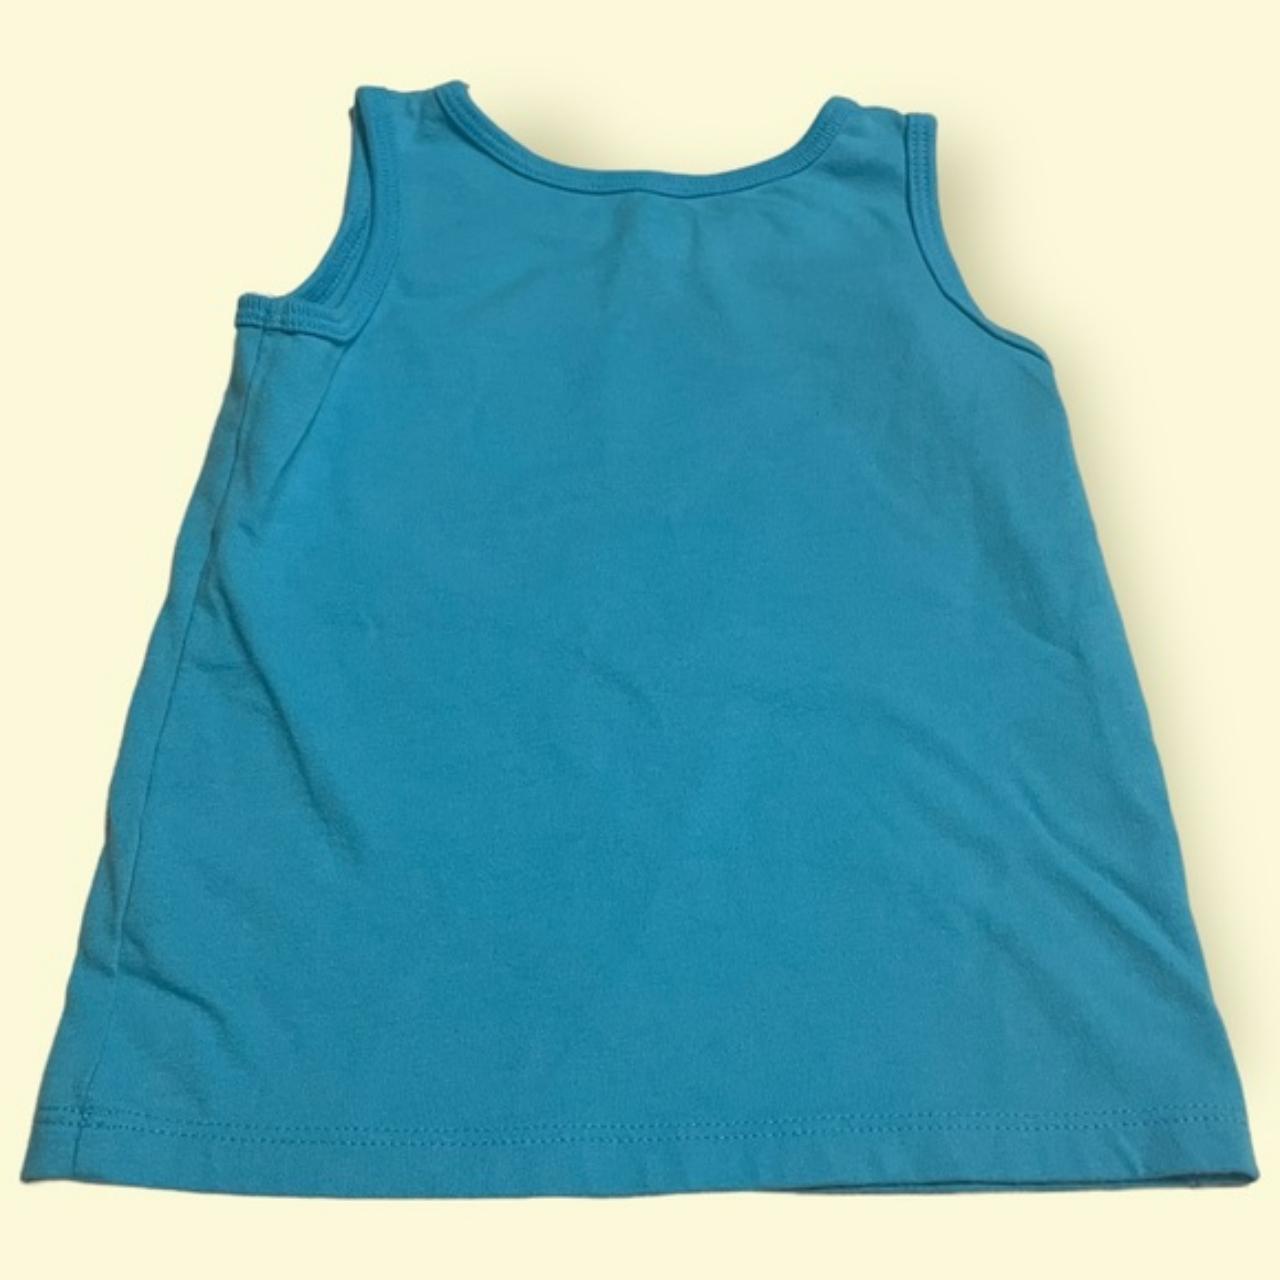 Product Image 2 - Garanimals Tank Top Size 2T

Condition: